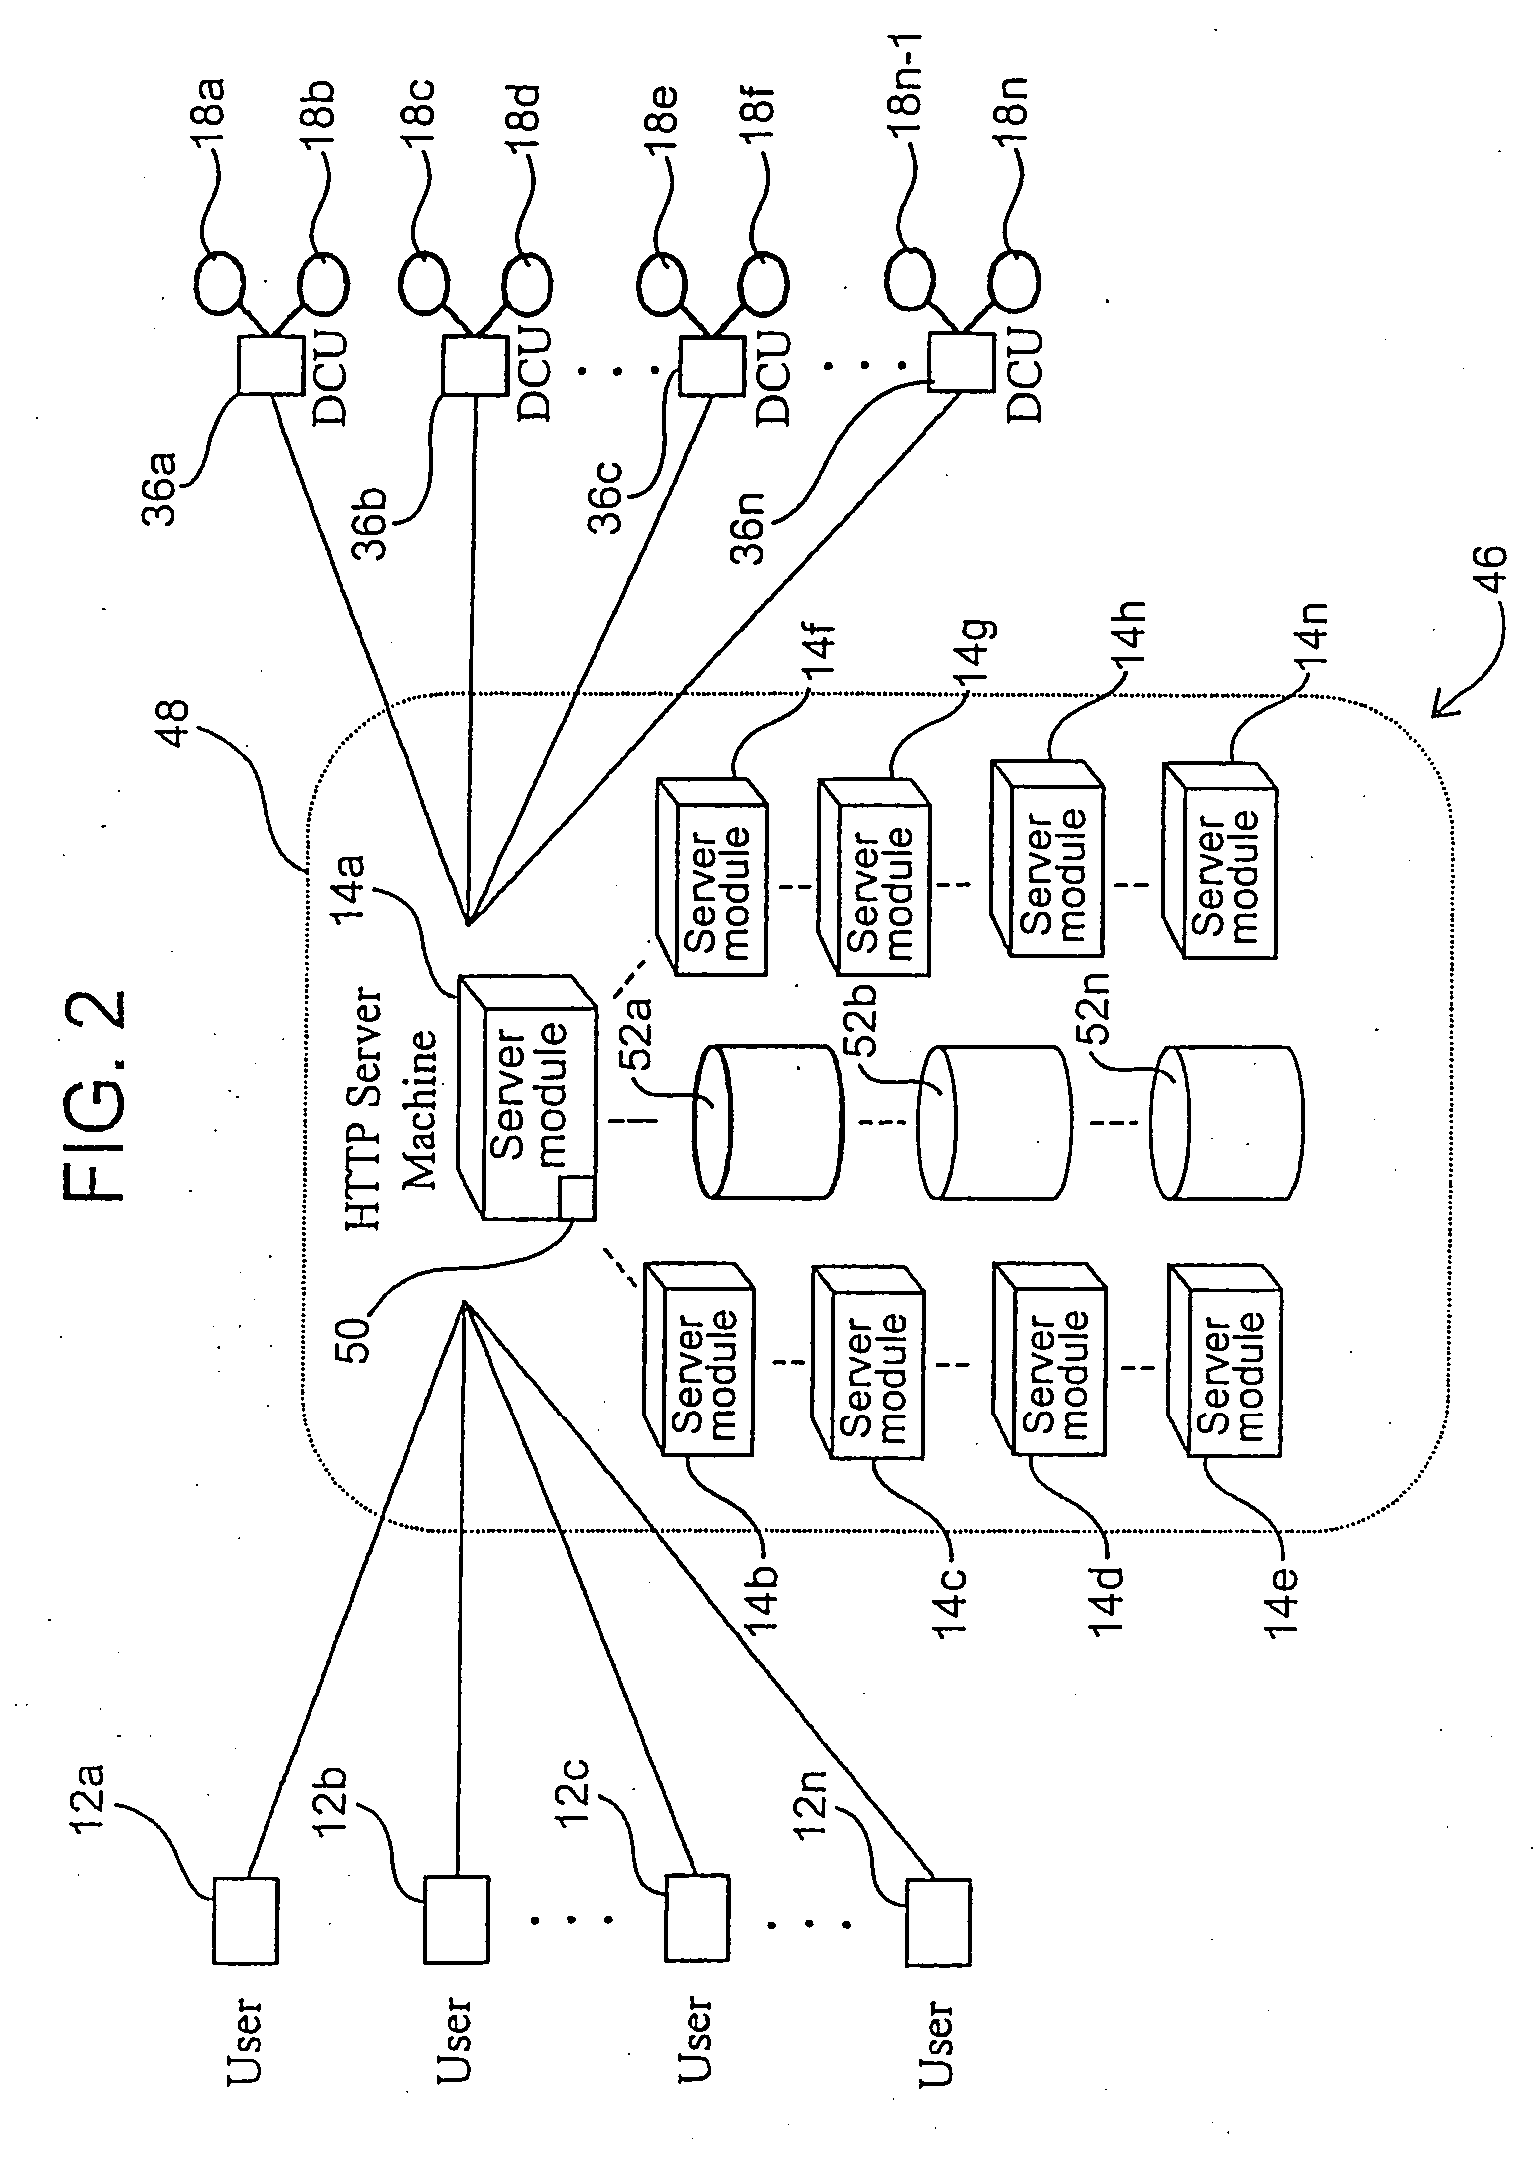 Access and control system for network-enabled devices